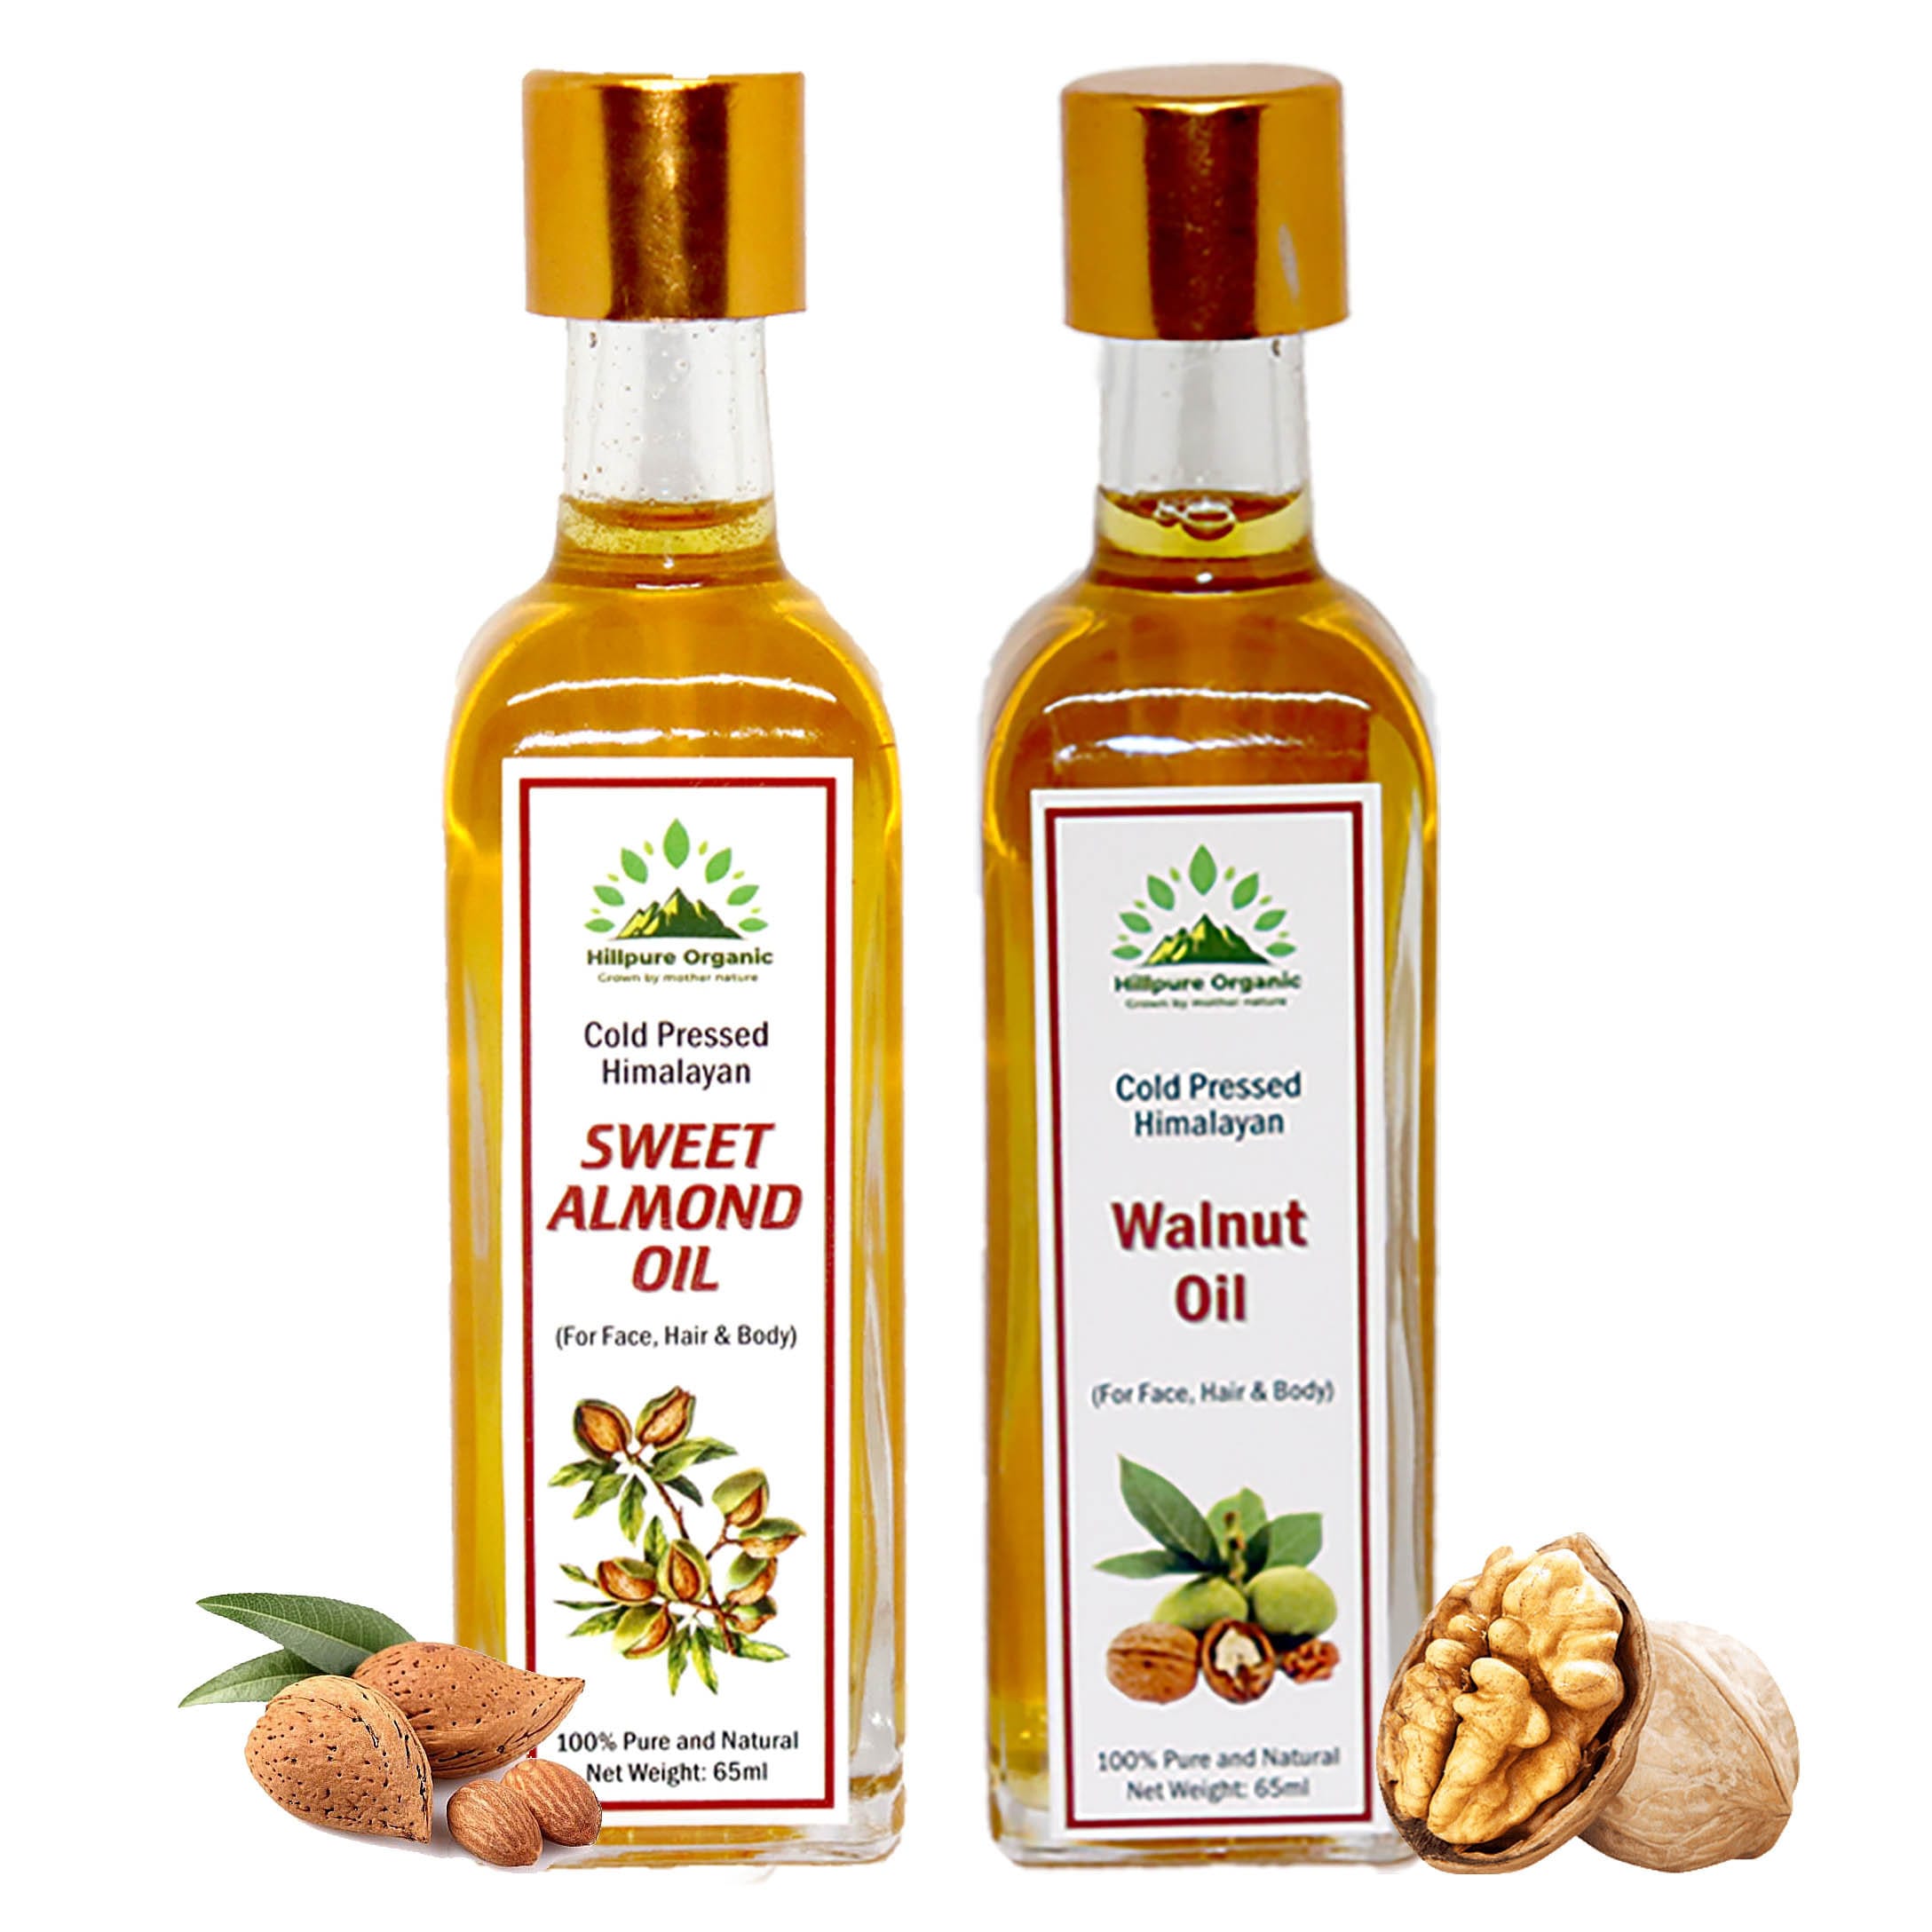 Can You Treat Wood With Cooking Oils!? (Olive Oil, Almond Oil, Walnut Oil)  